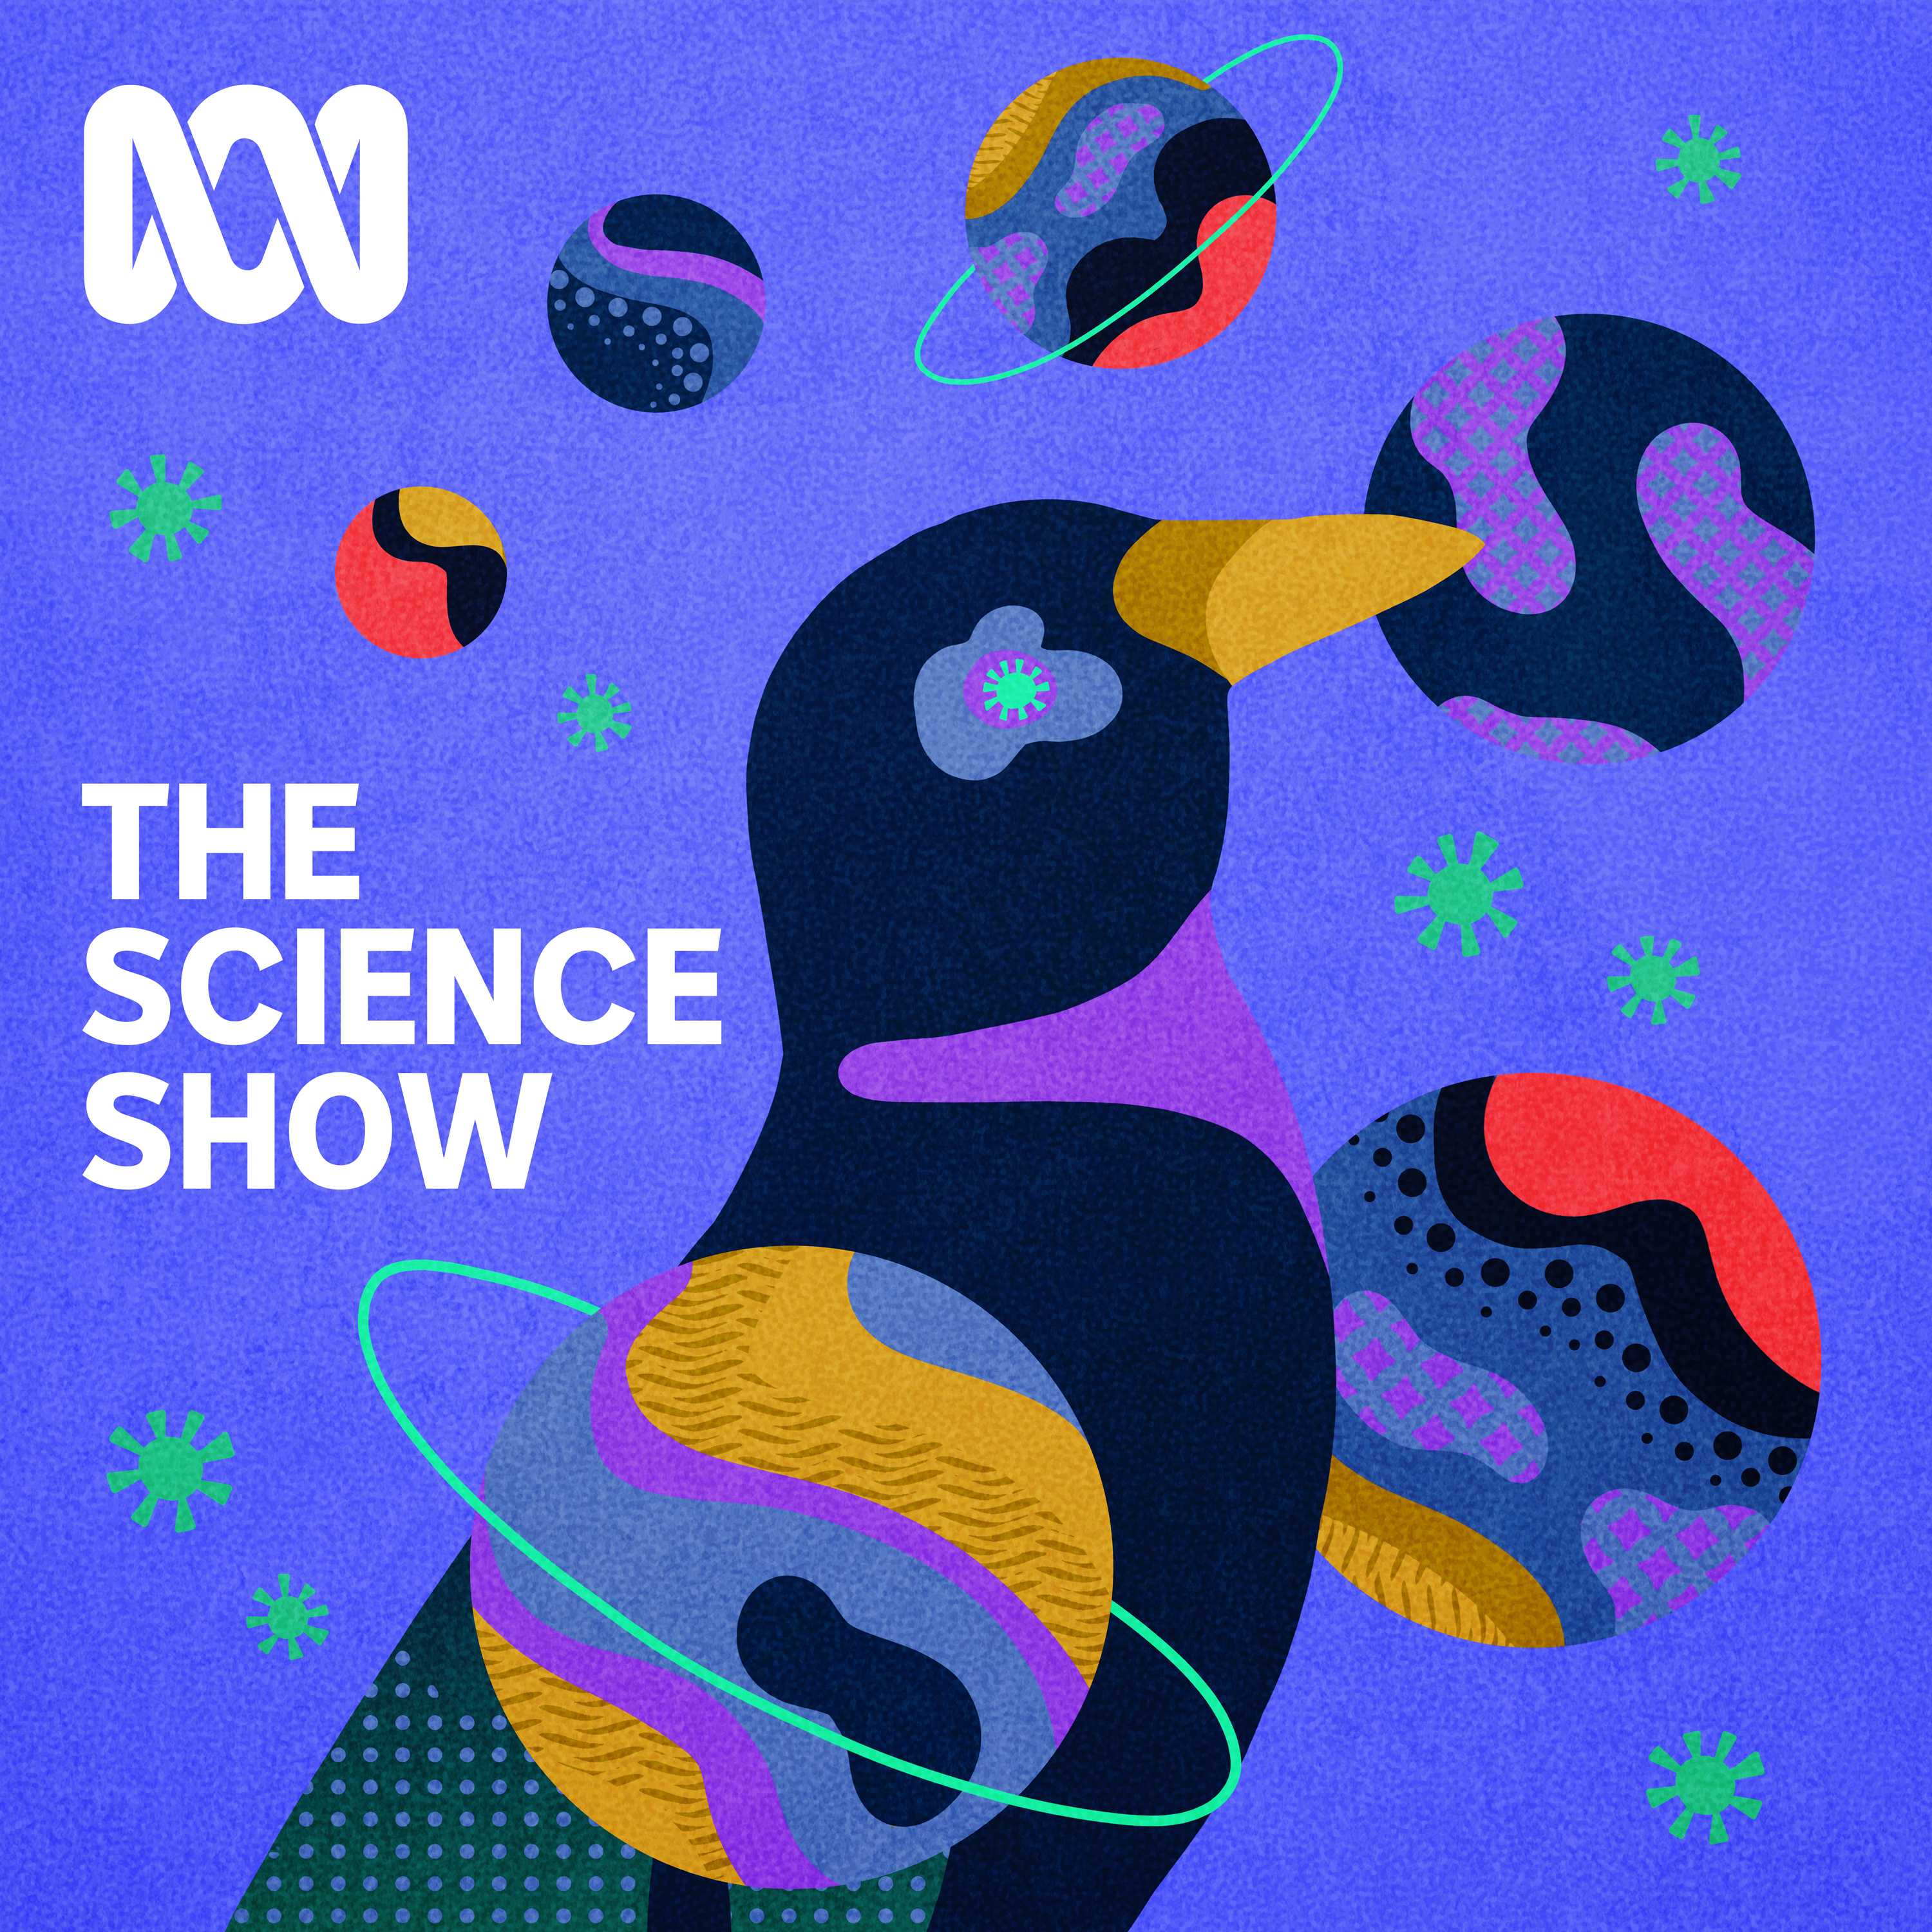 The Science Show Image